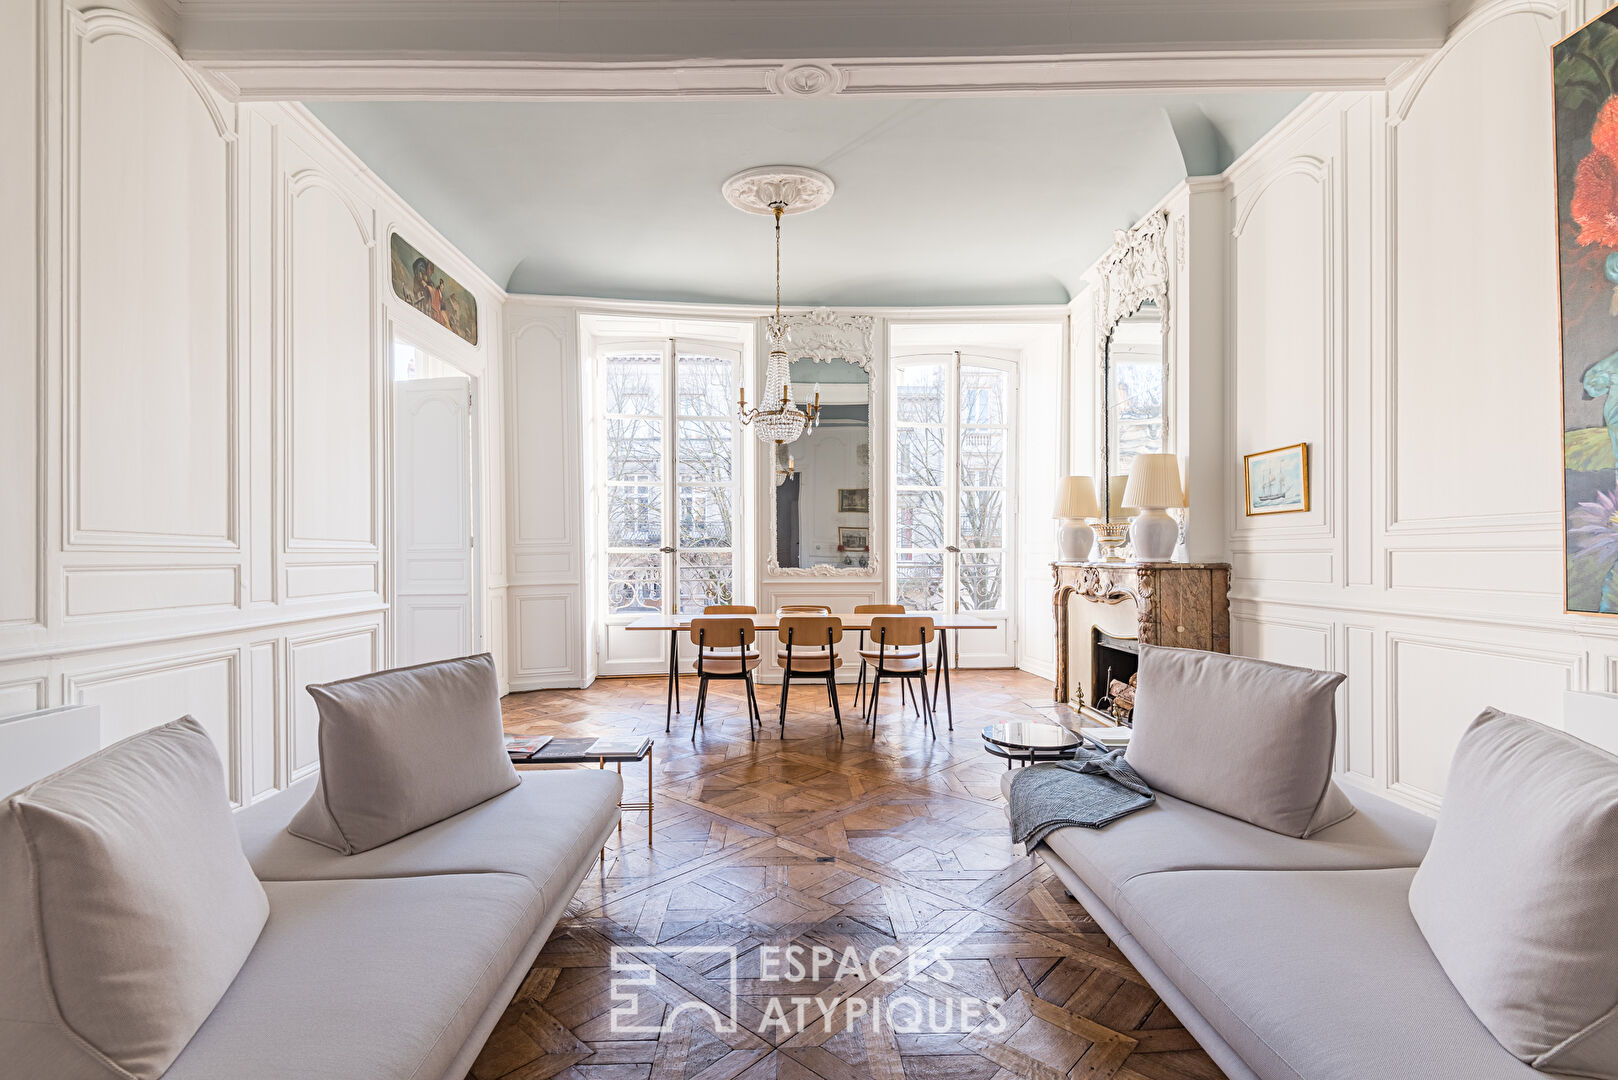 Architect’s apartment in the heart of Bordeaux